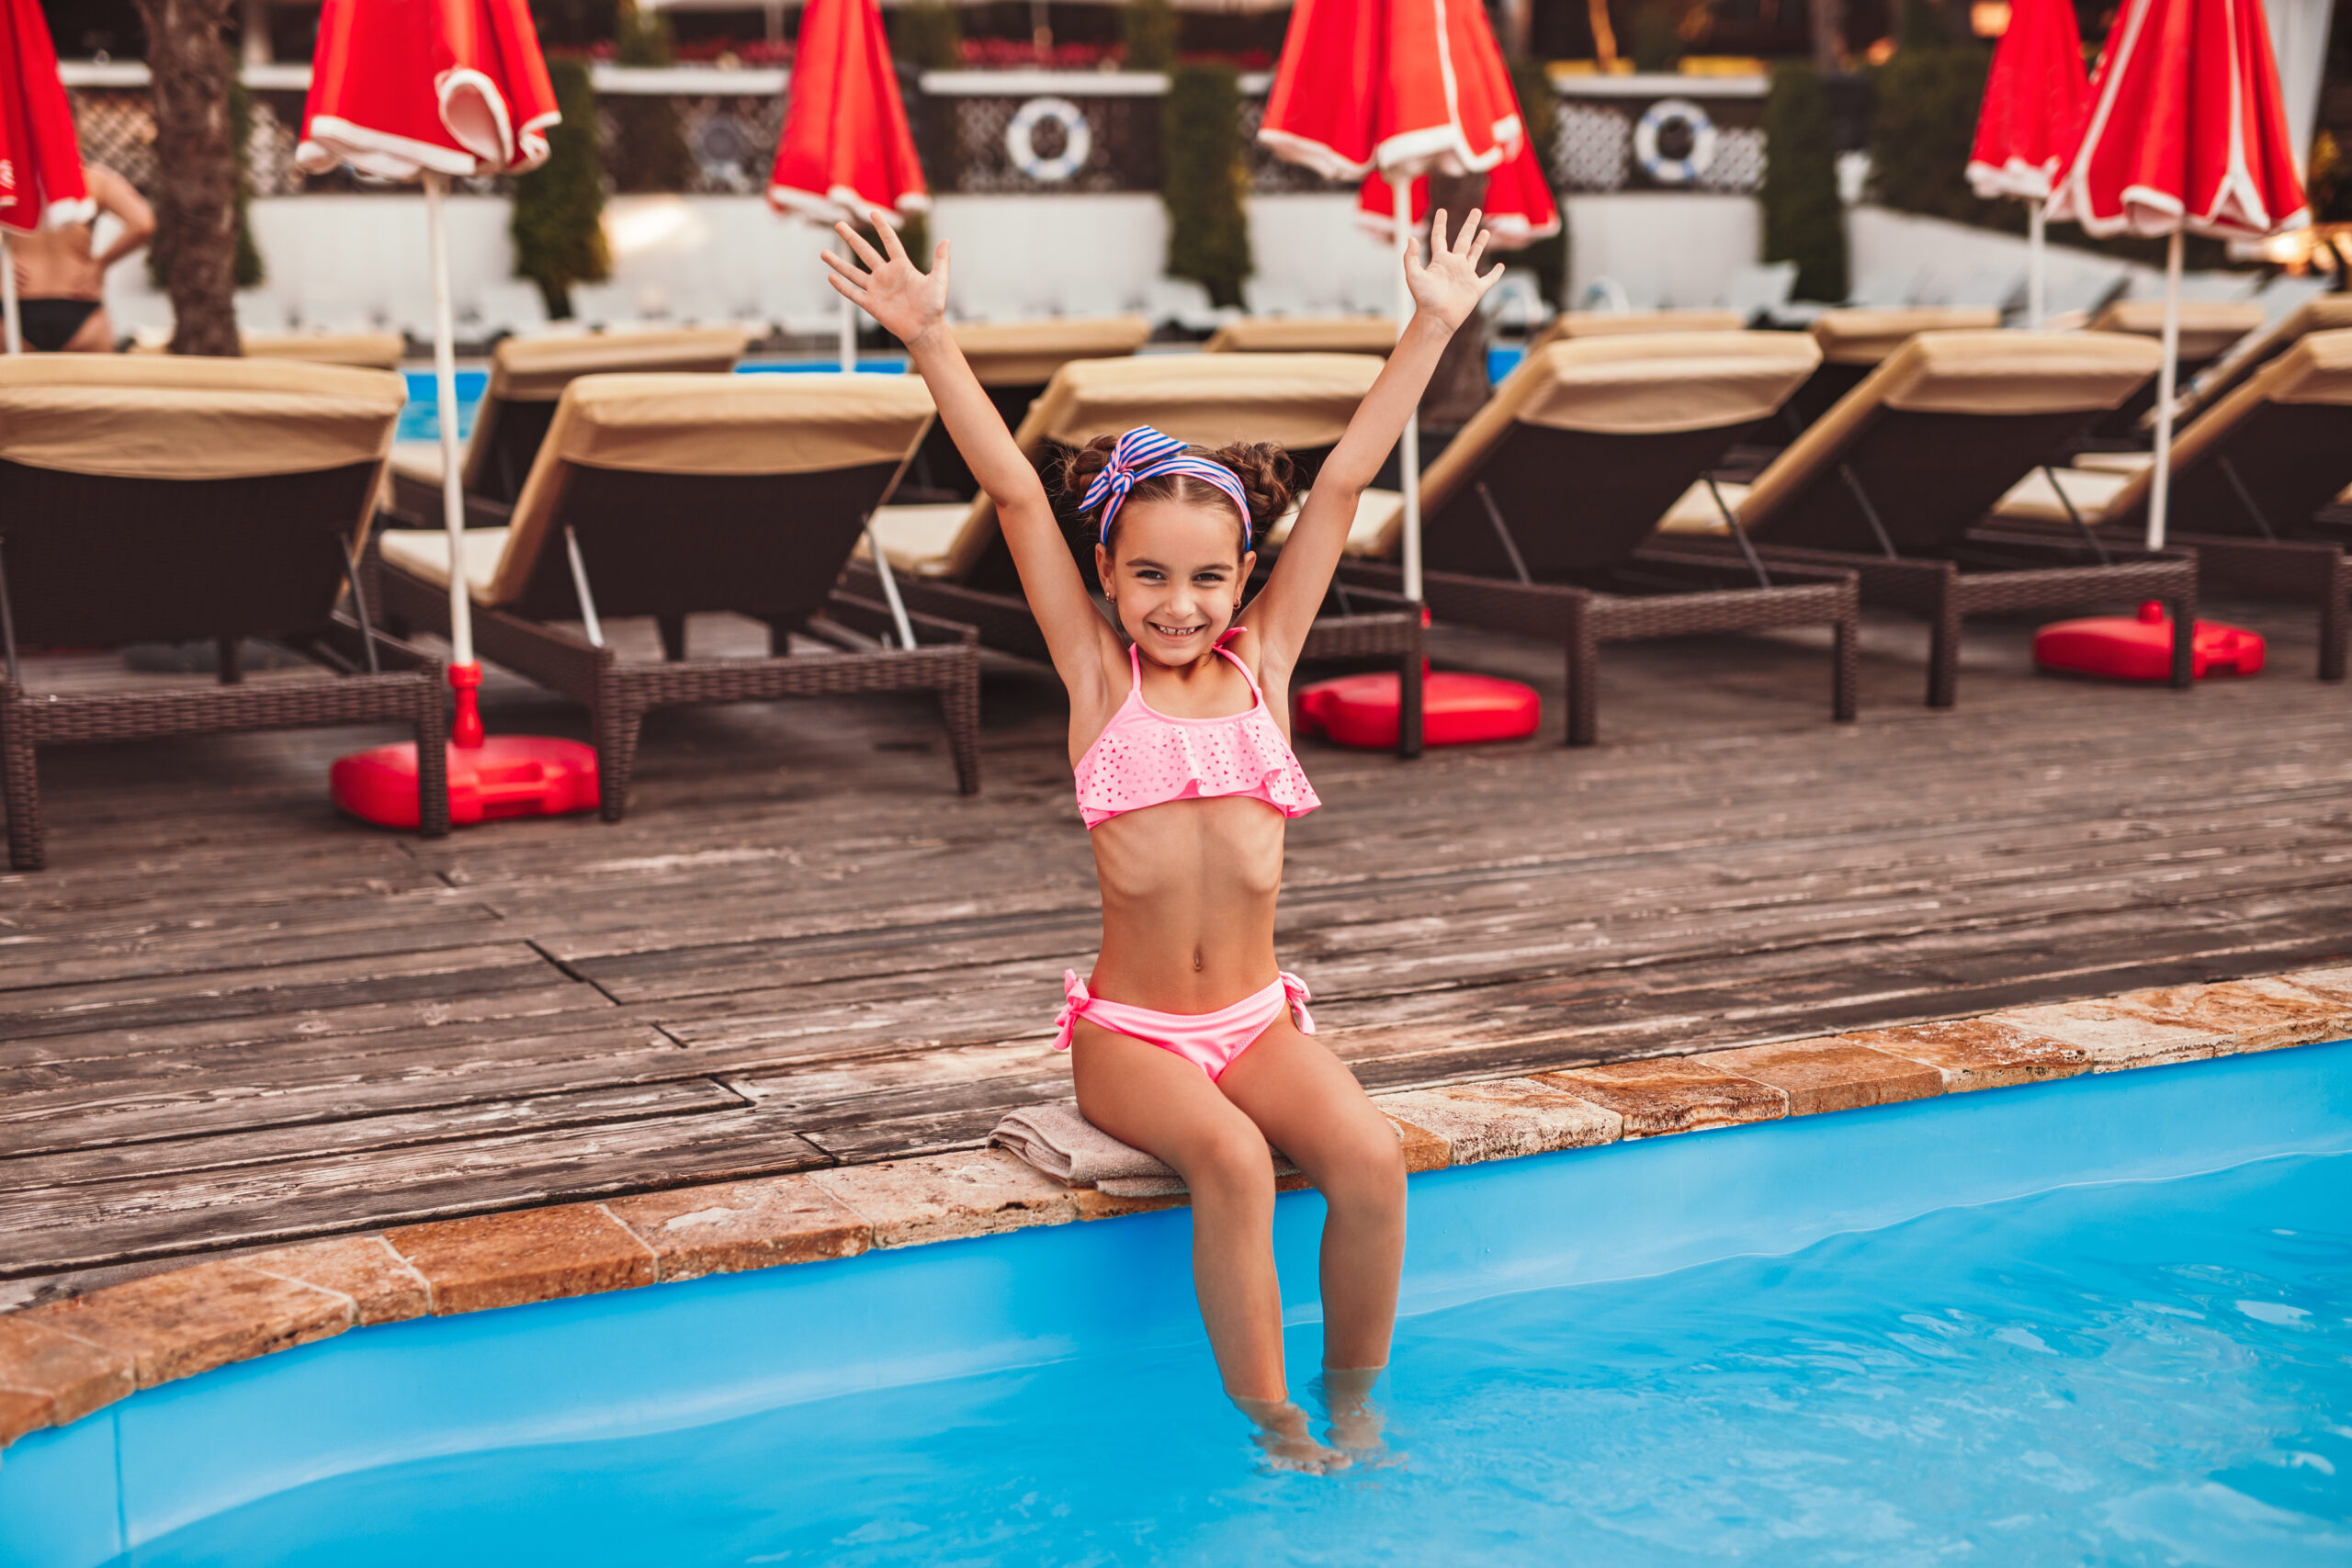 A child sitting at the edge of the pool with her arms raised in excitement, ready to jump or play in the water.